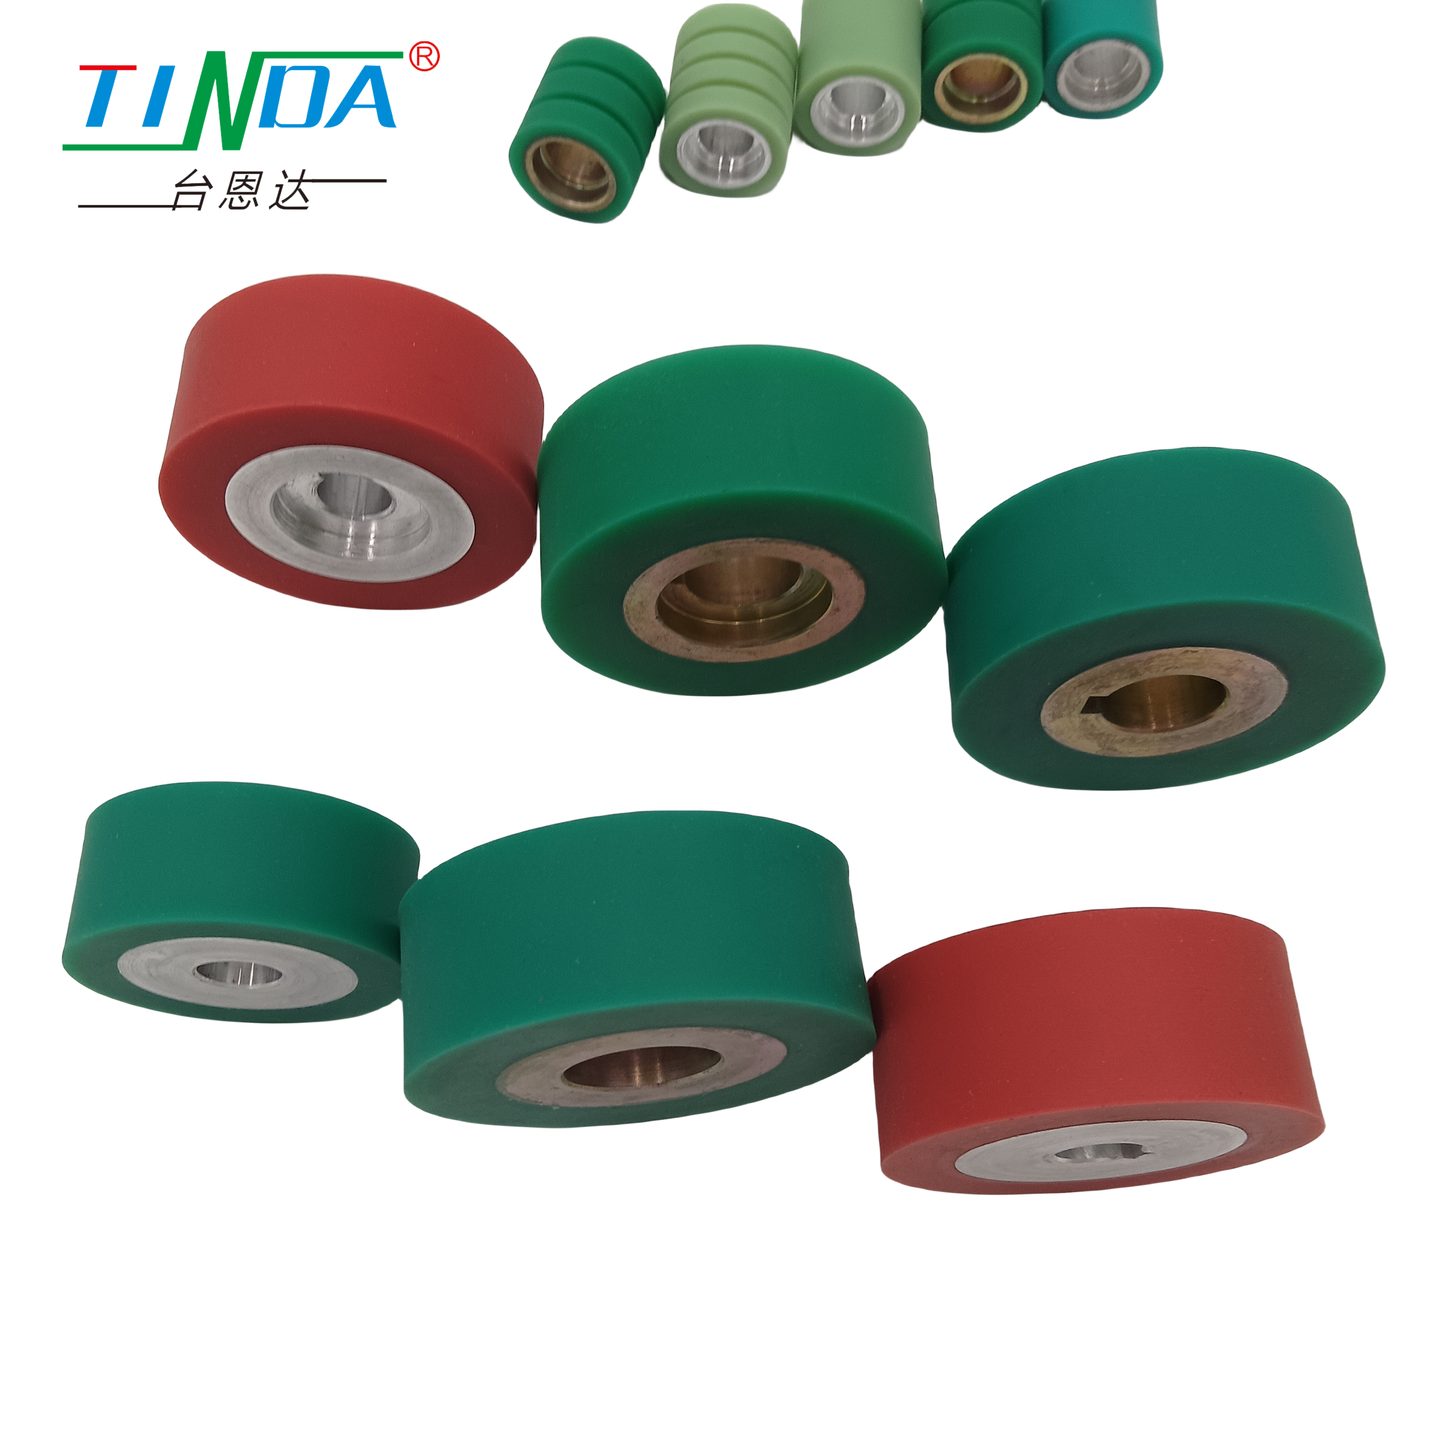 Hot-resistant Silicone wheels